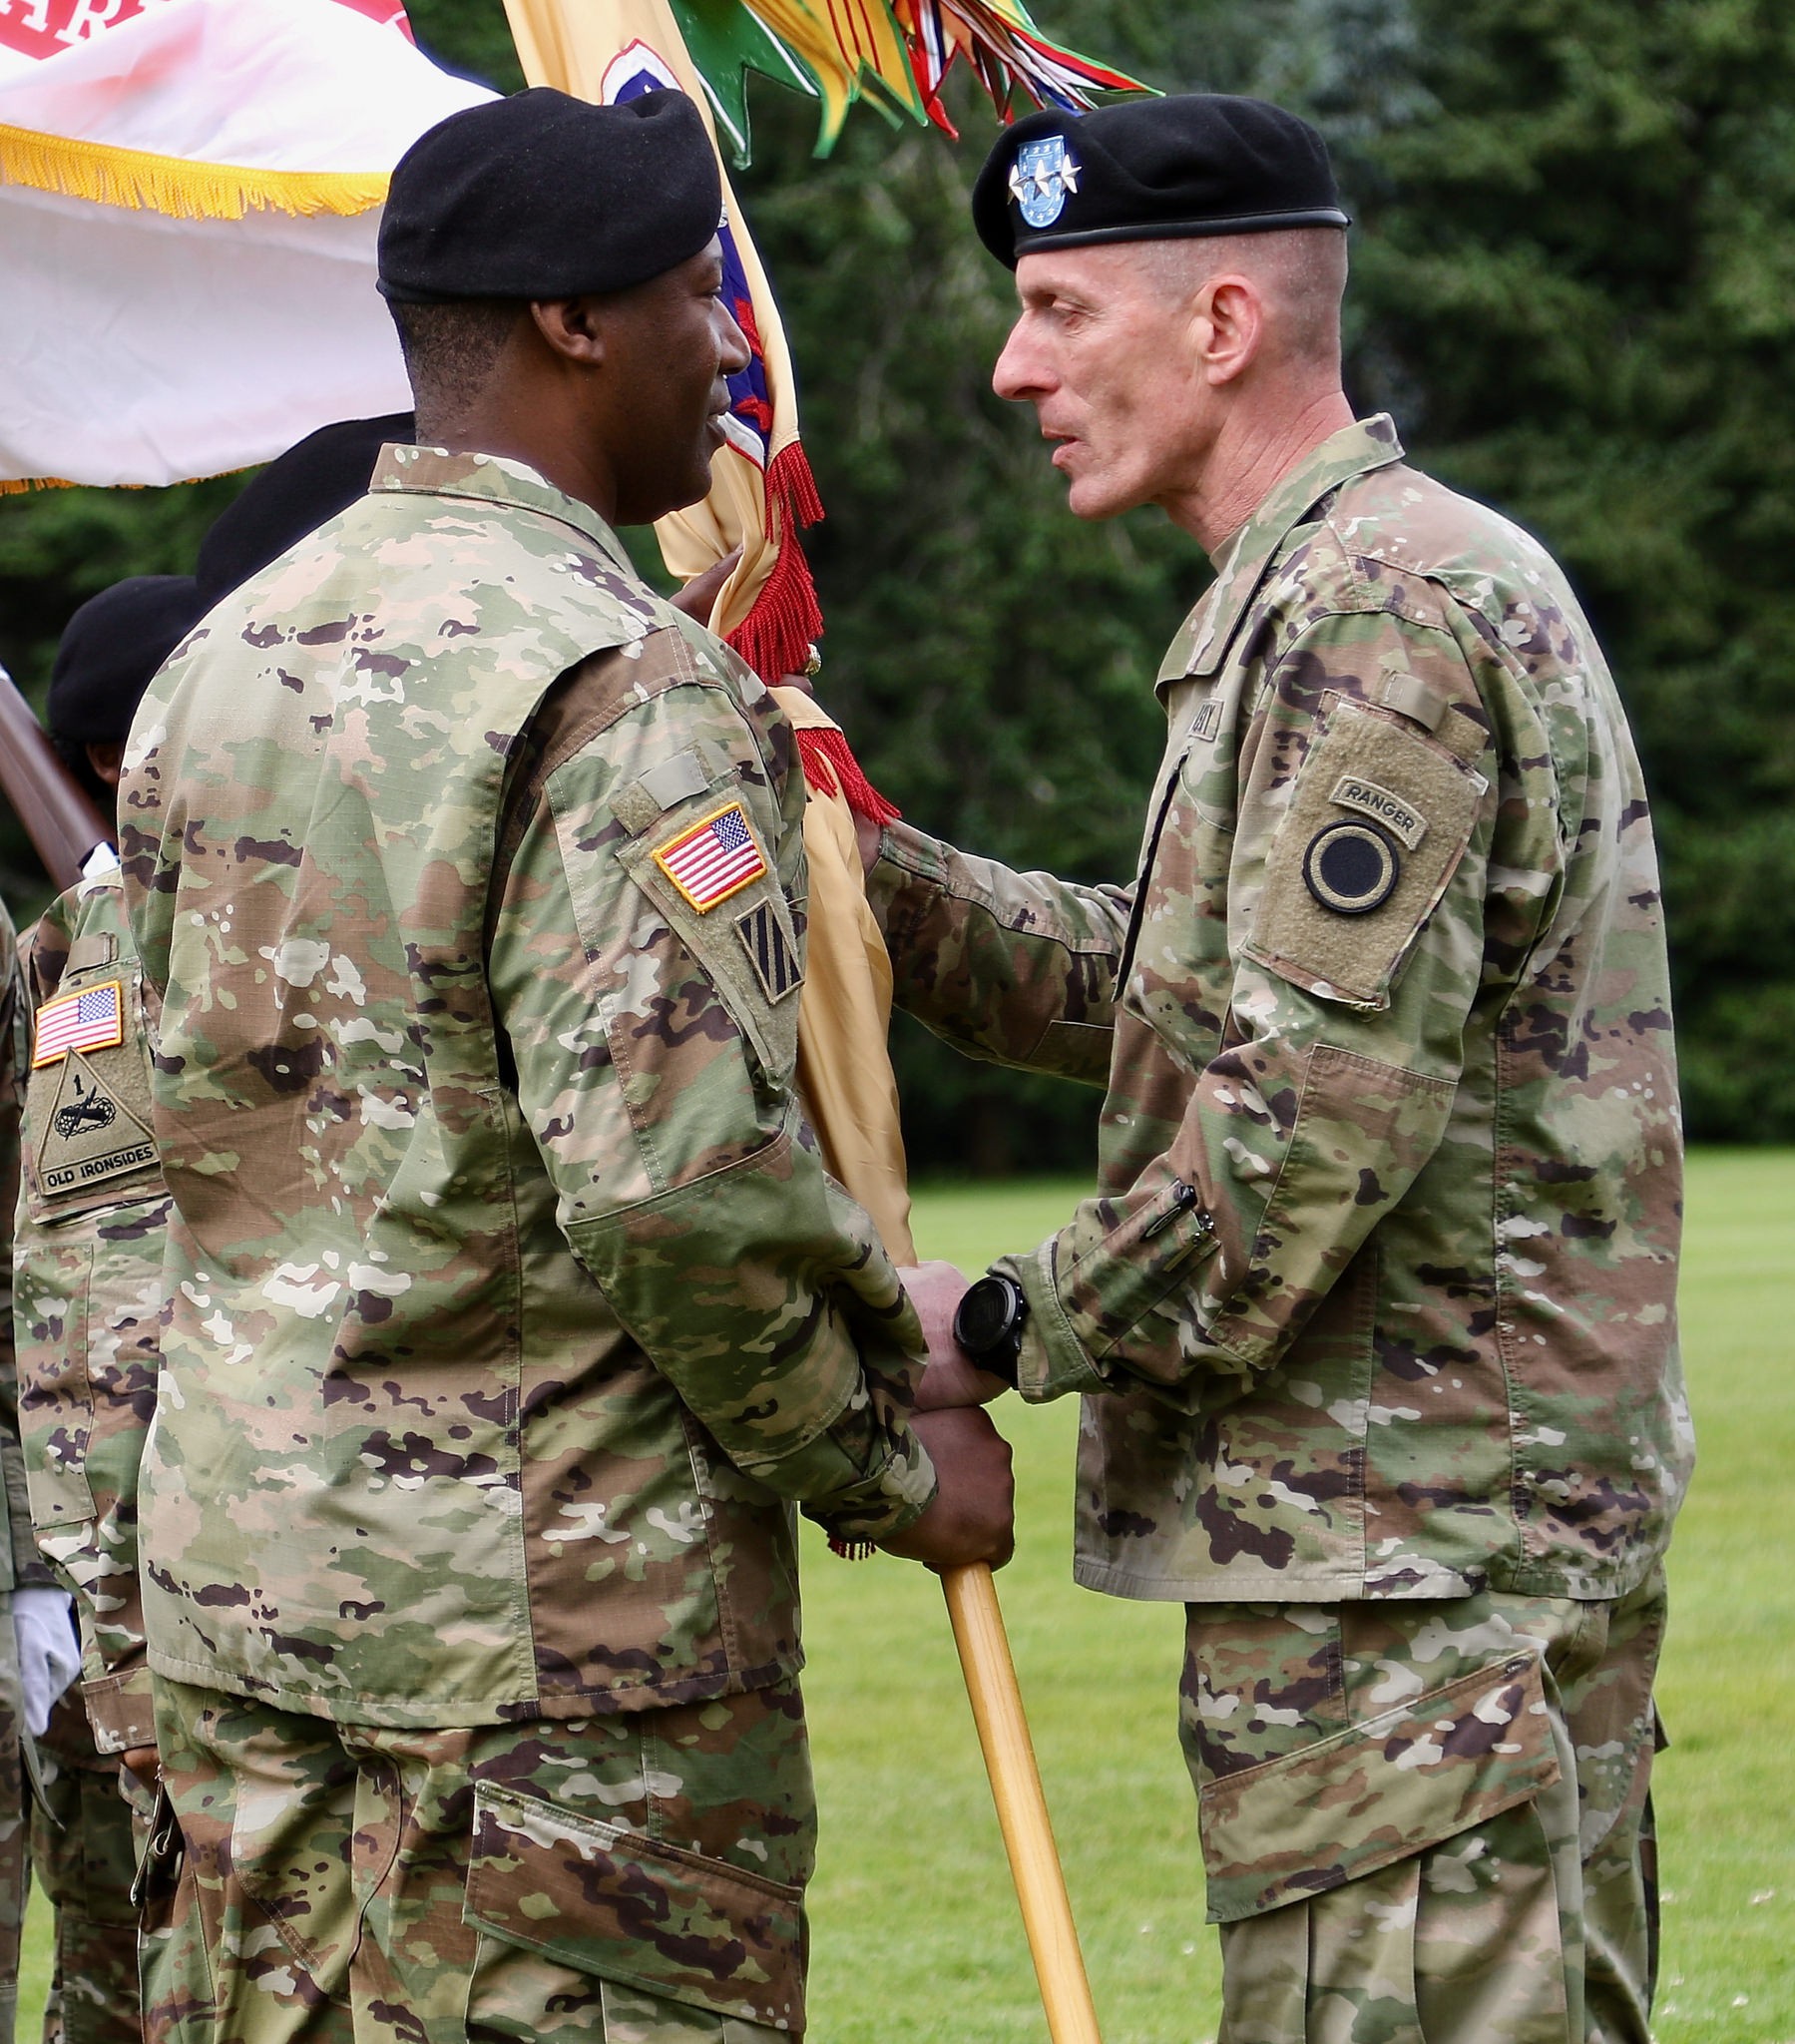 Moore assumes command of 593rd ESC Article The United States Army